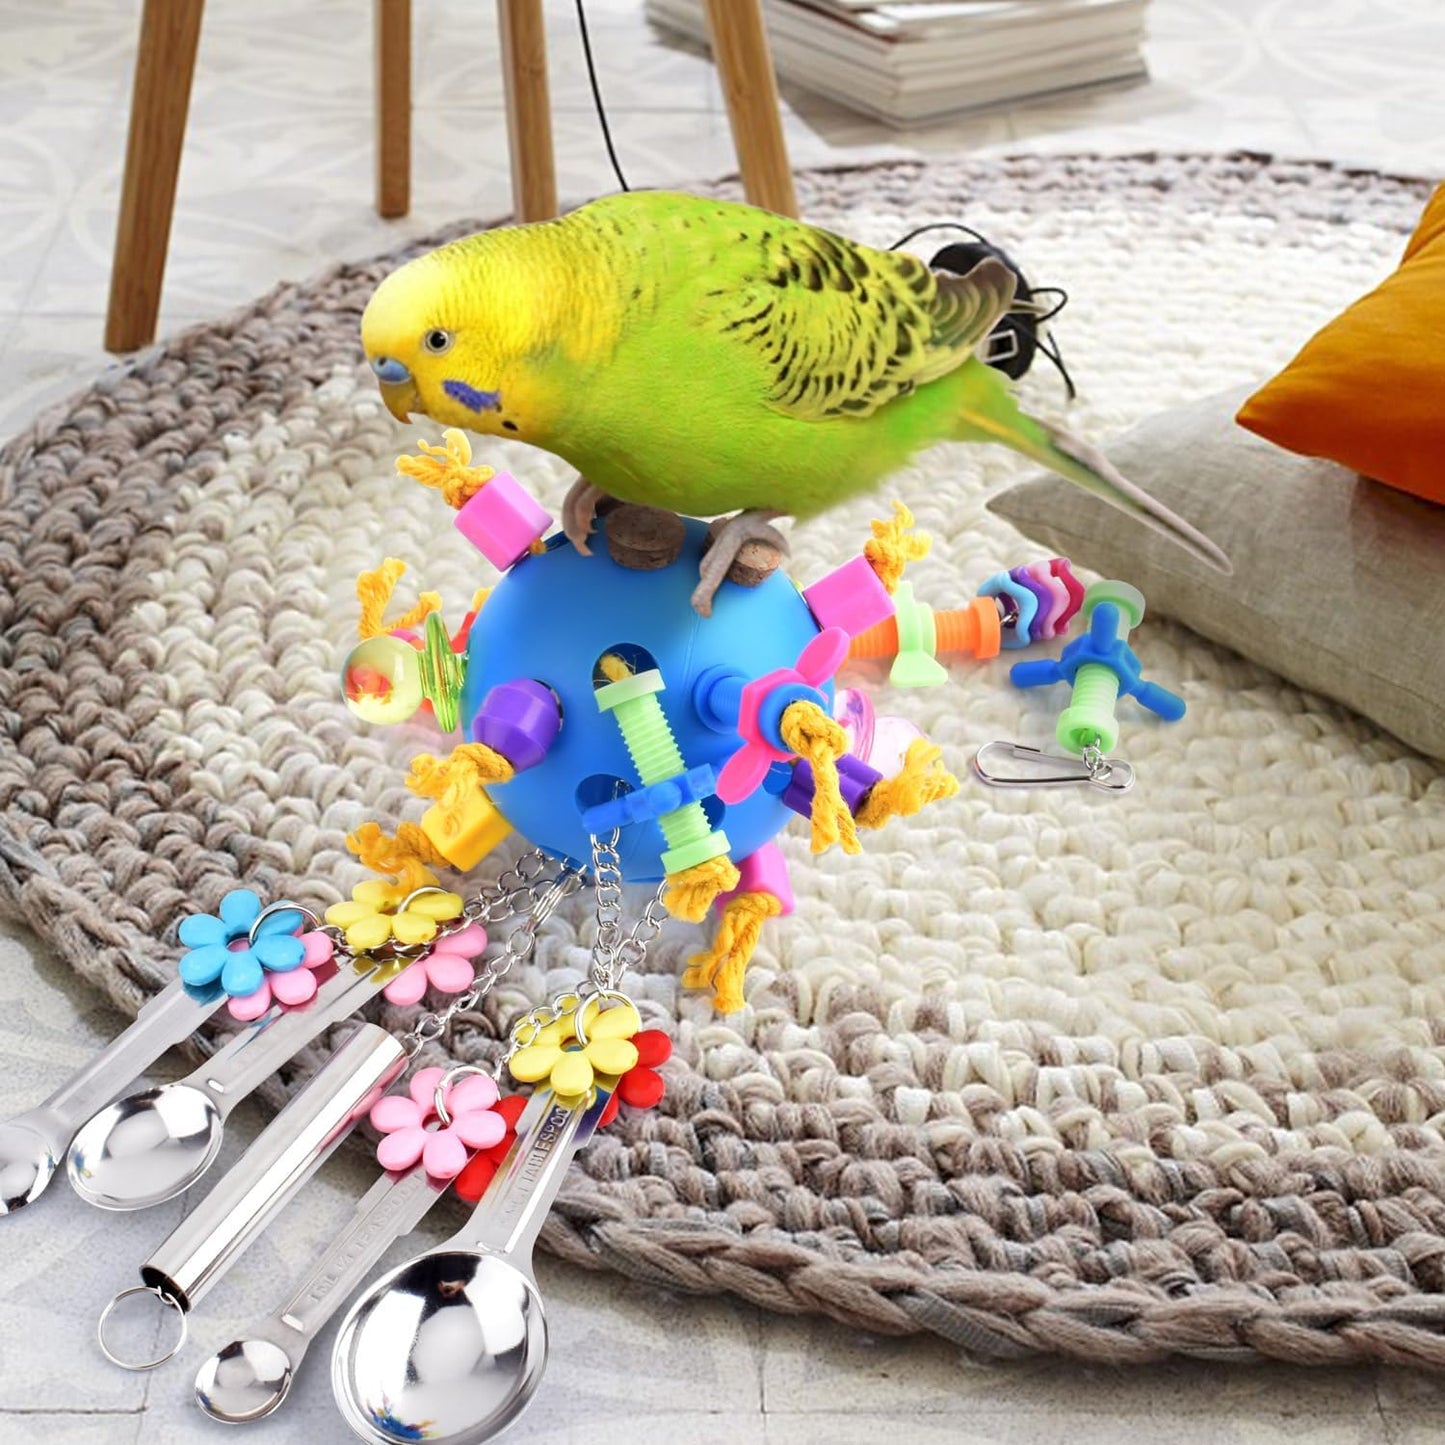 KATUMO Bird Toys, Parrot Pull Spoons Colorful Acrylic Stick Toys Bird Chew Toys for Amazon Parrot, African Grey, Conure, Caique, Quaker, Small Cockatoo, Mini Macaw, Eclectus and Similar Birds